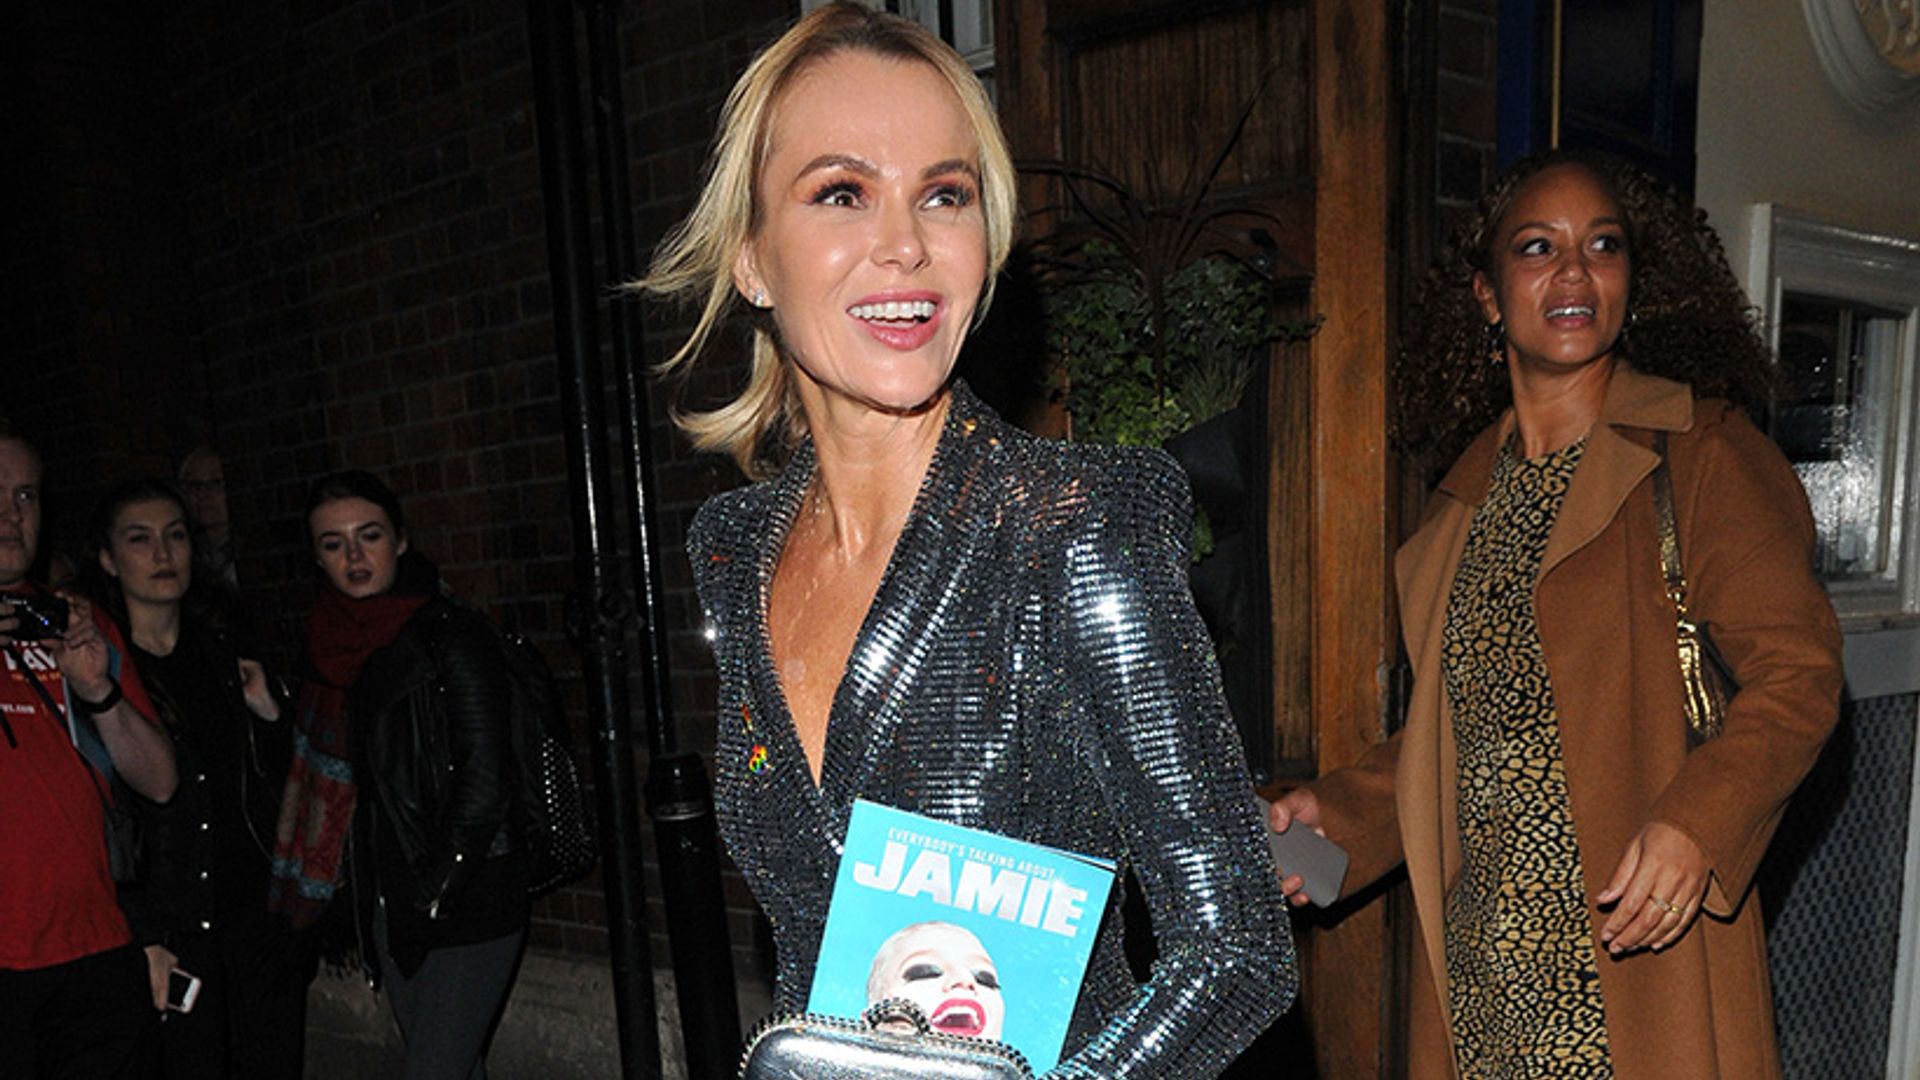 Amanda Holden shows off her super-sexy legs!